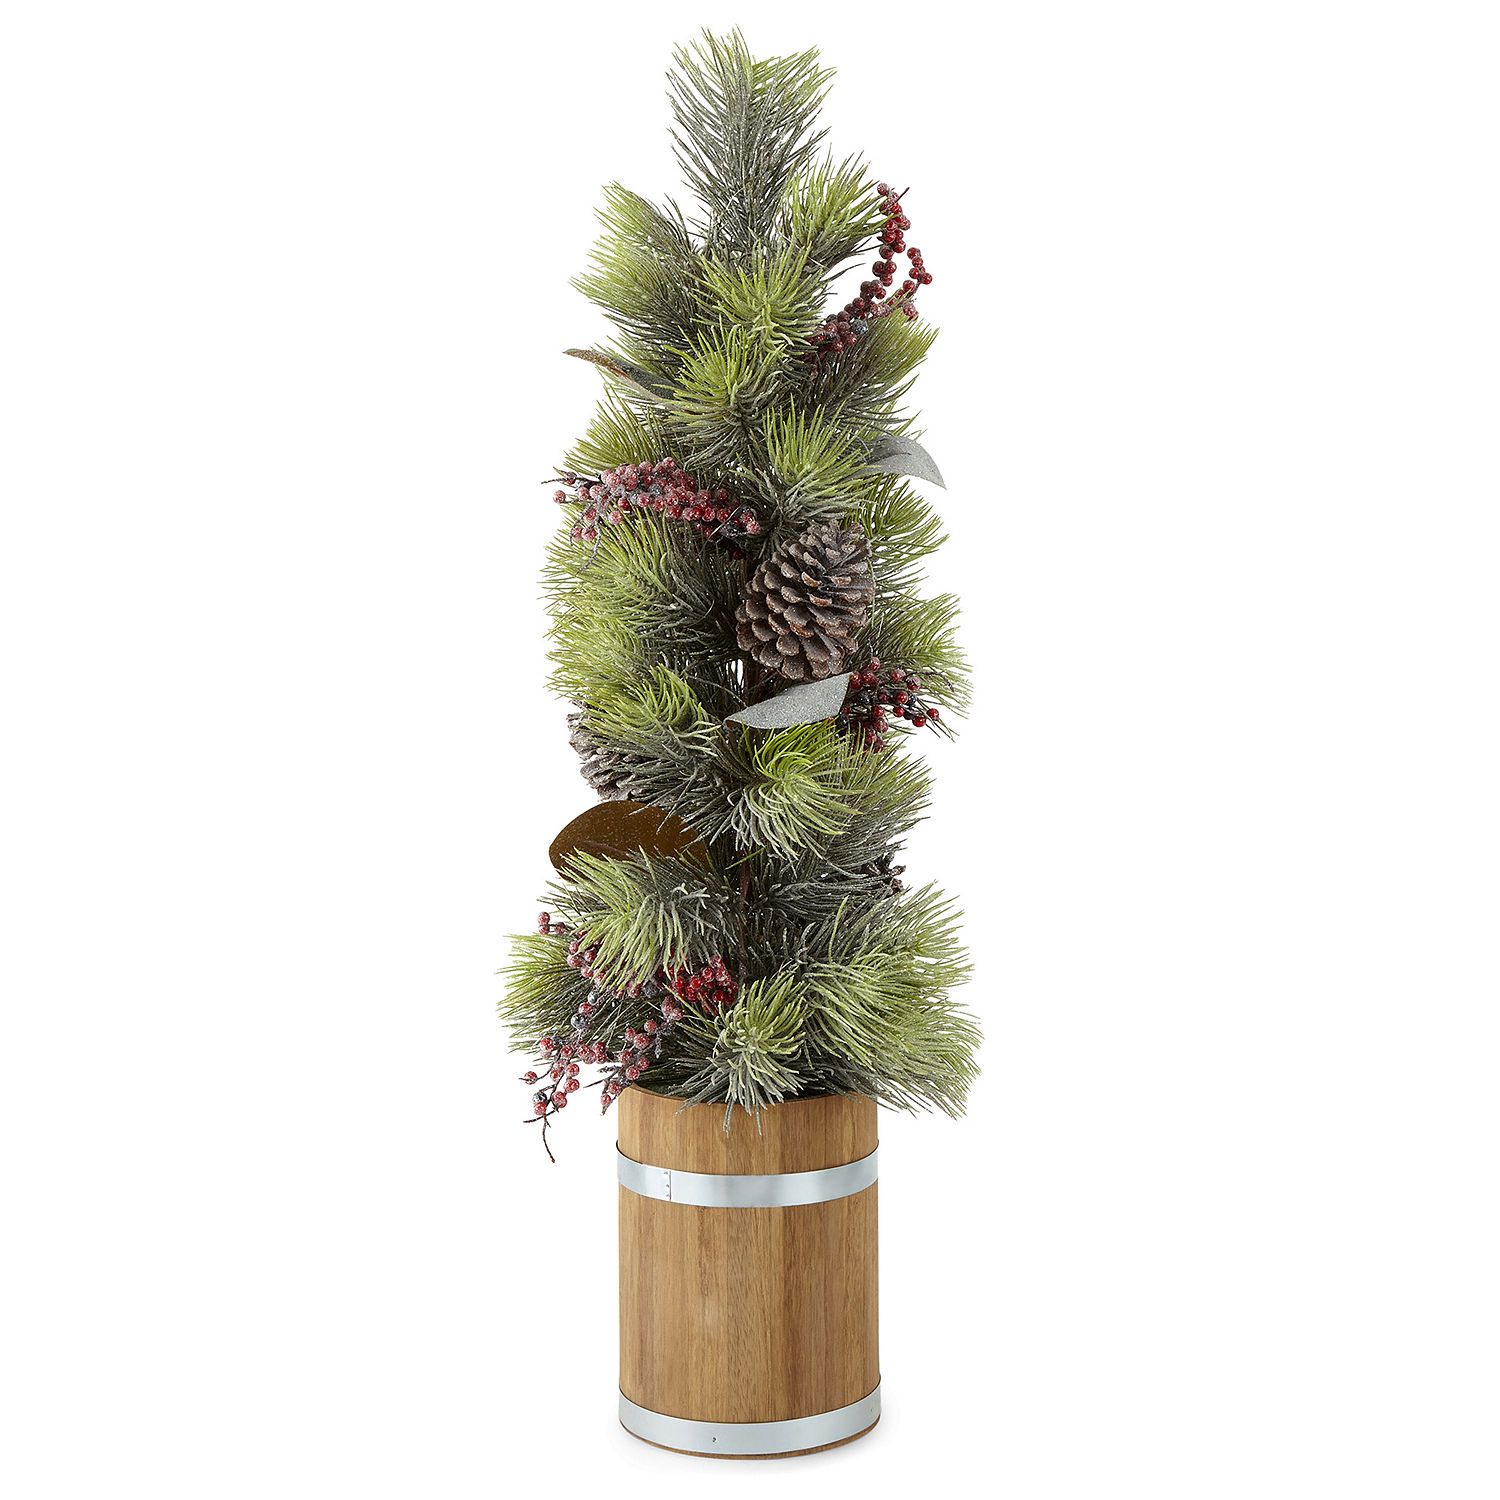 North Pole Trading Co. 36in Led Pinecone Christmas Tabletop Tree | JCPenney